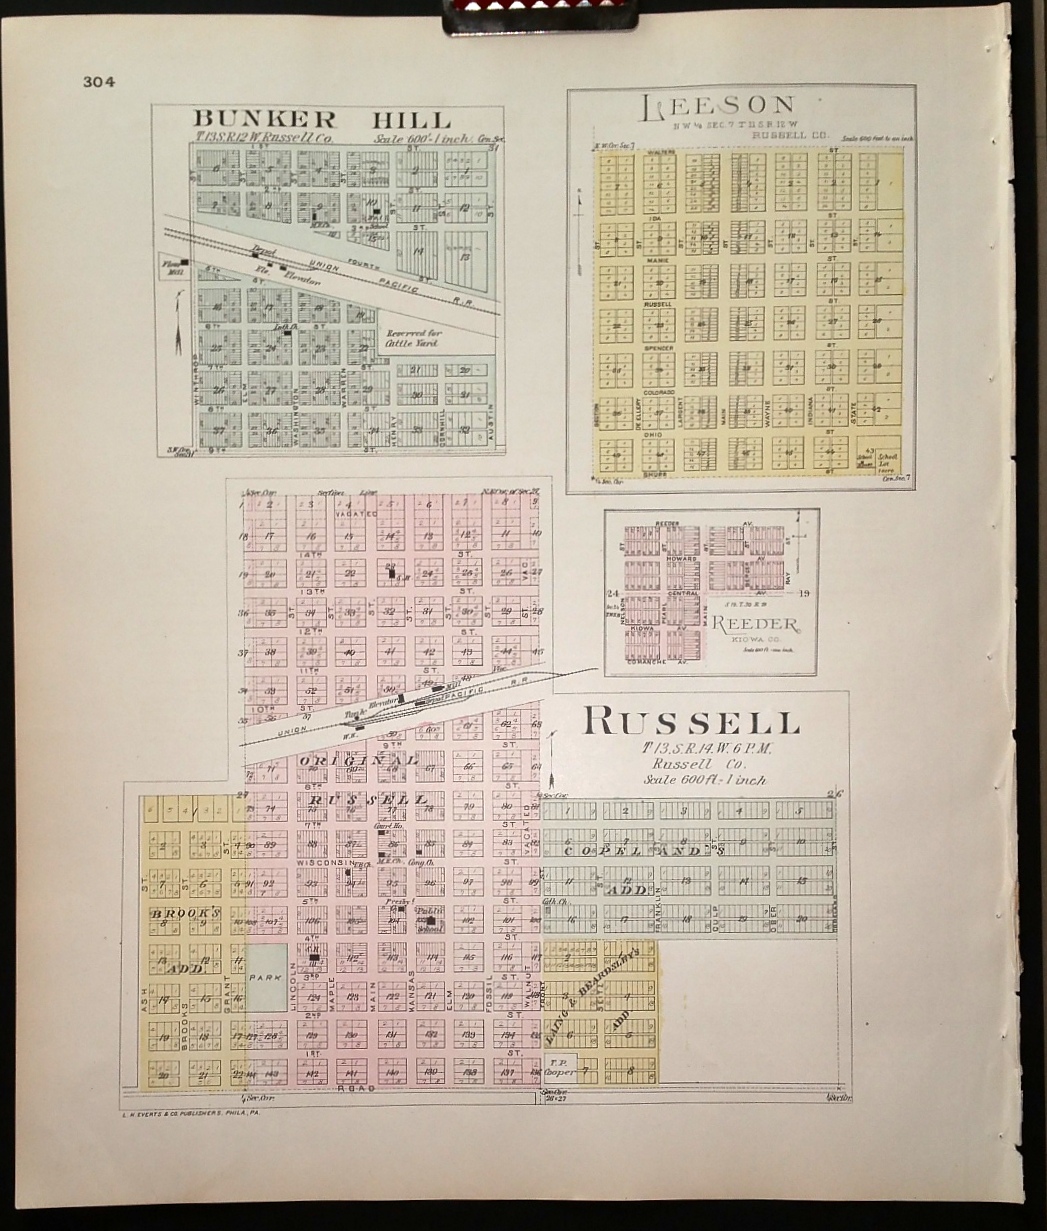 Image for [Map] Russell County, Kansas [backed with] Bunker Hill, Leeson, & Russell (of Russell Co.), and Reeder (of Kiowa Co.)